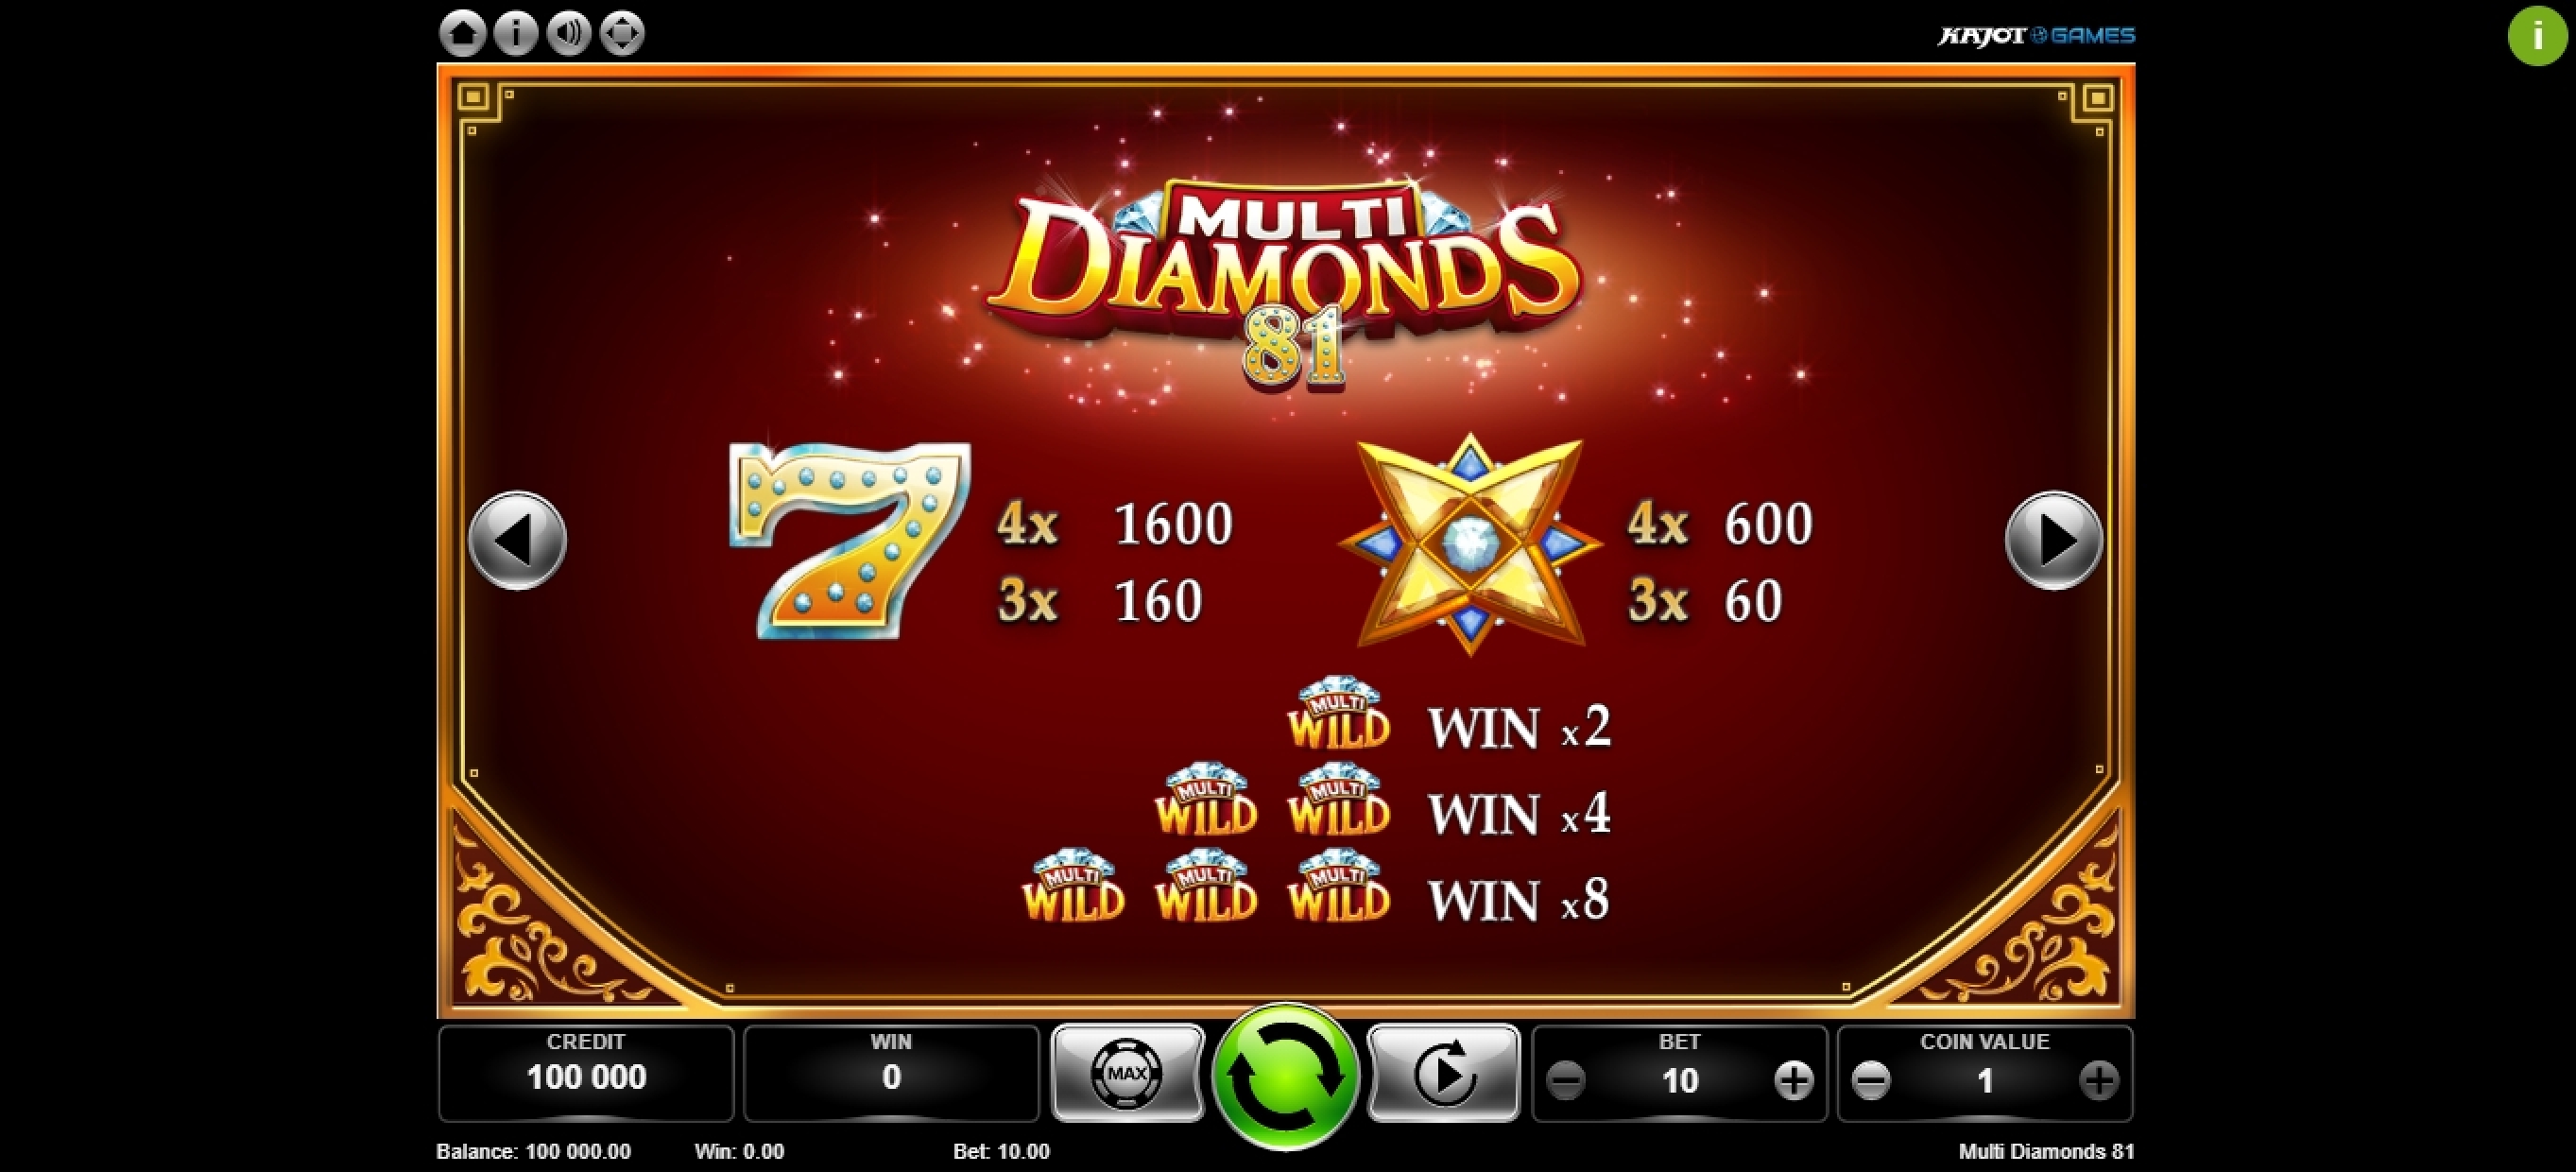 Are $45 Spins Better Than $9 Spins?! Find Out on Mega Diamond!